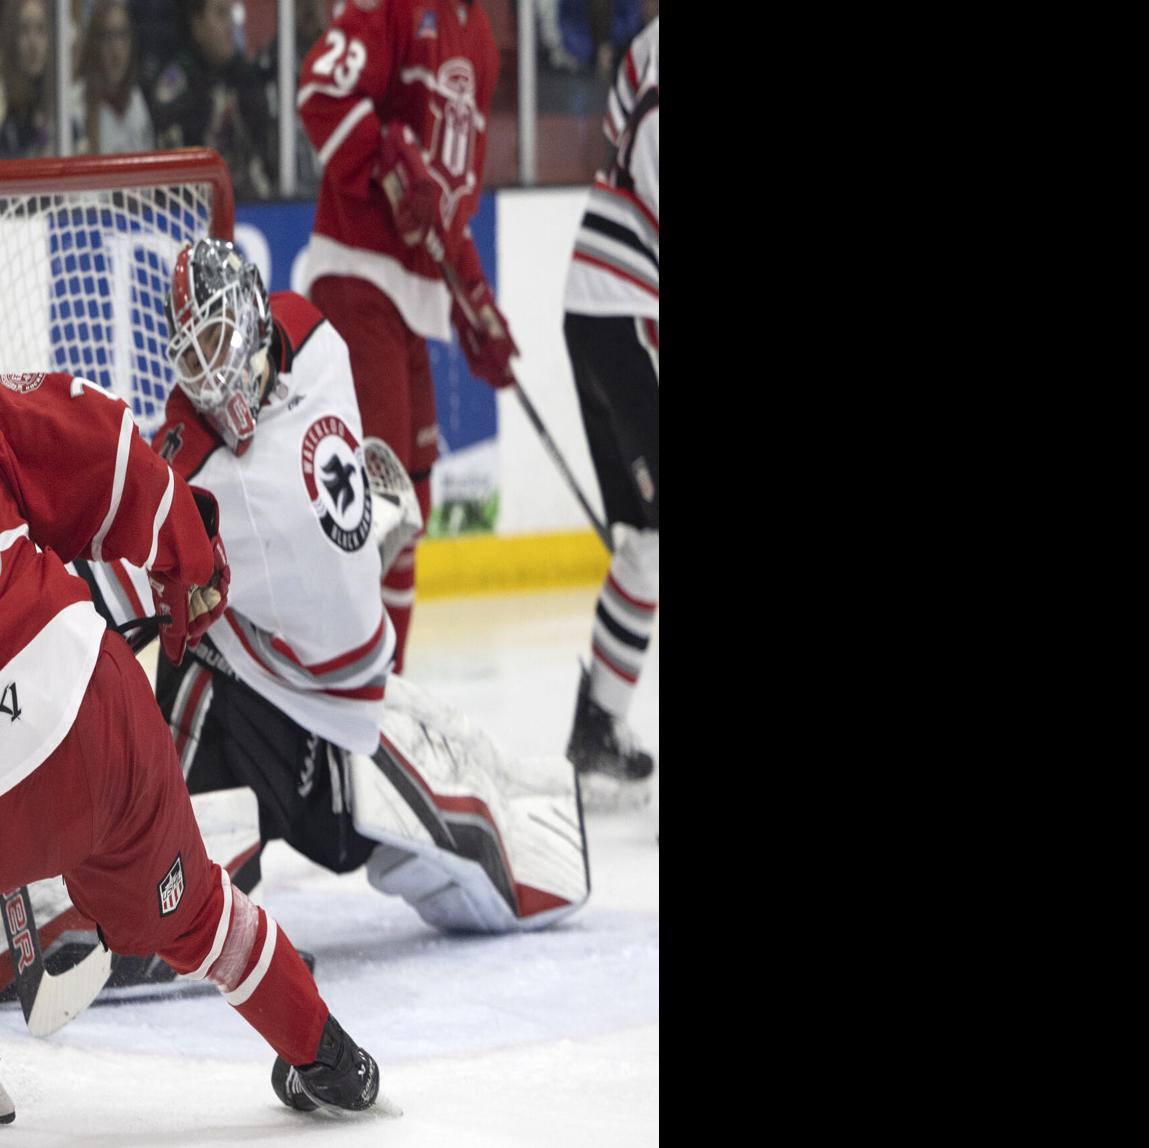 USHL: Fighting Saints move to 6-0 behind McCarthy shutout, Local Sports